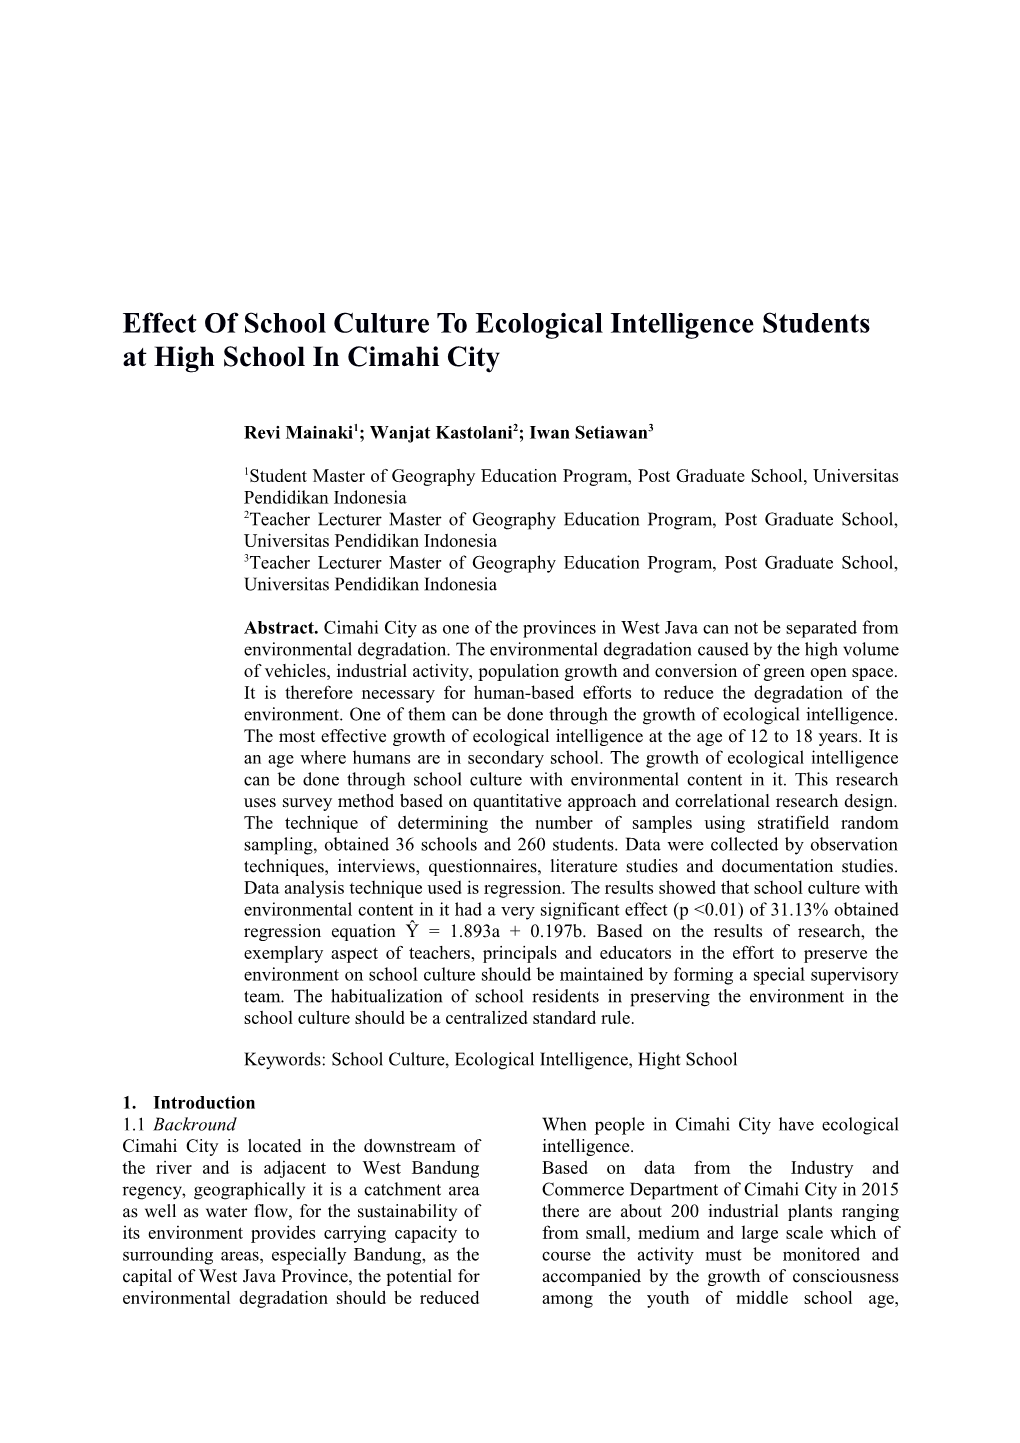 Effect of School Culture to Ecological Intelligence Studentsathigh School in Cimahi City